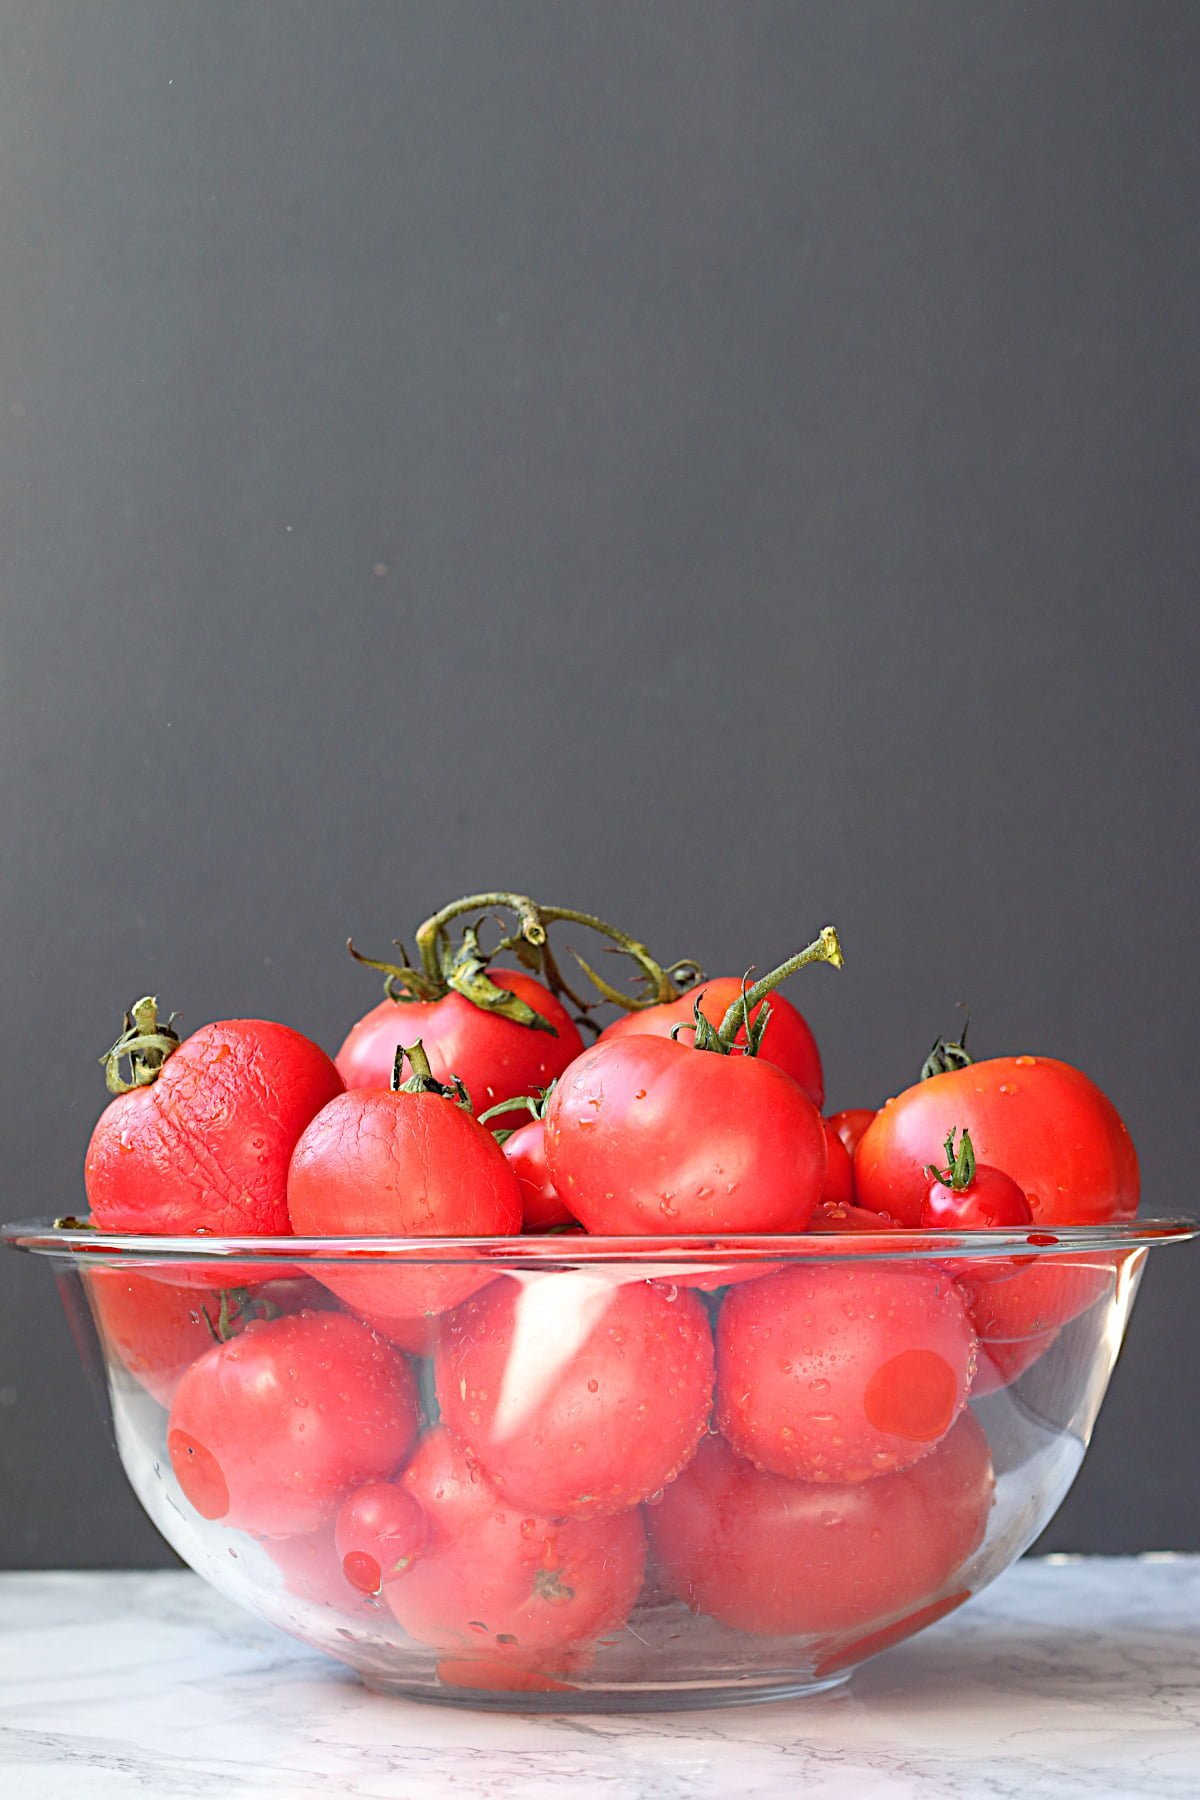 Fresh, ripe tomatoes in a glass bowl.